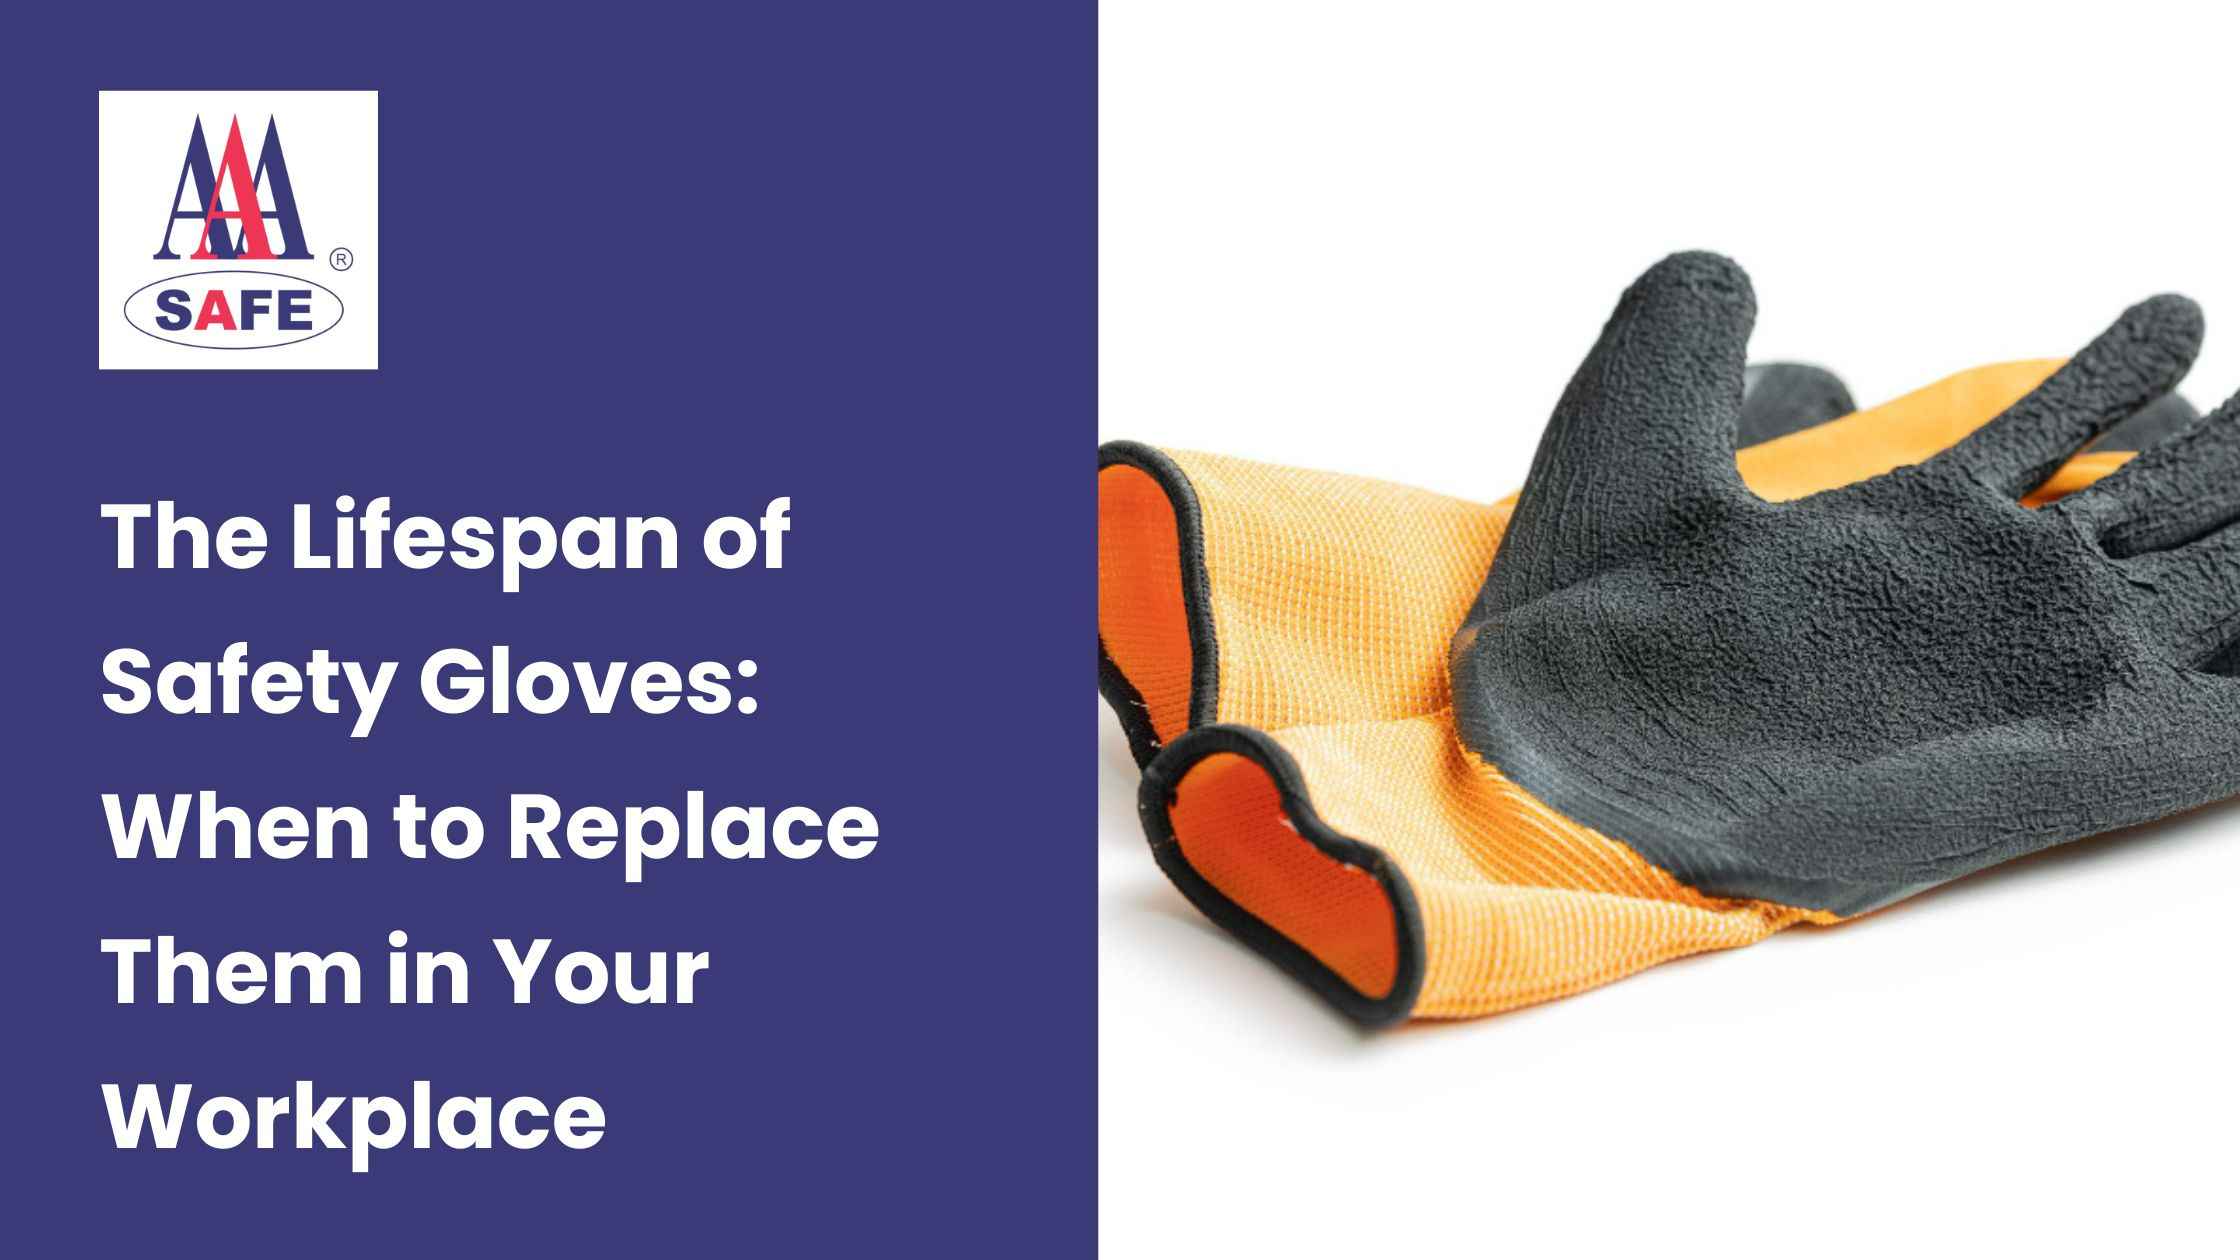 The Lifespan of Safety Gloves: When to Replace Them in Your Workplace